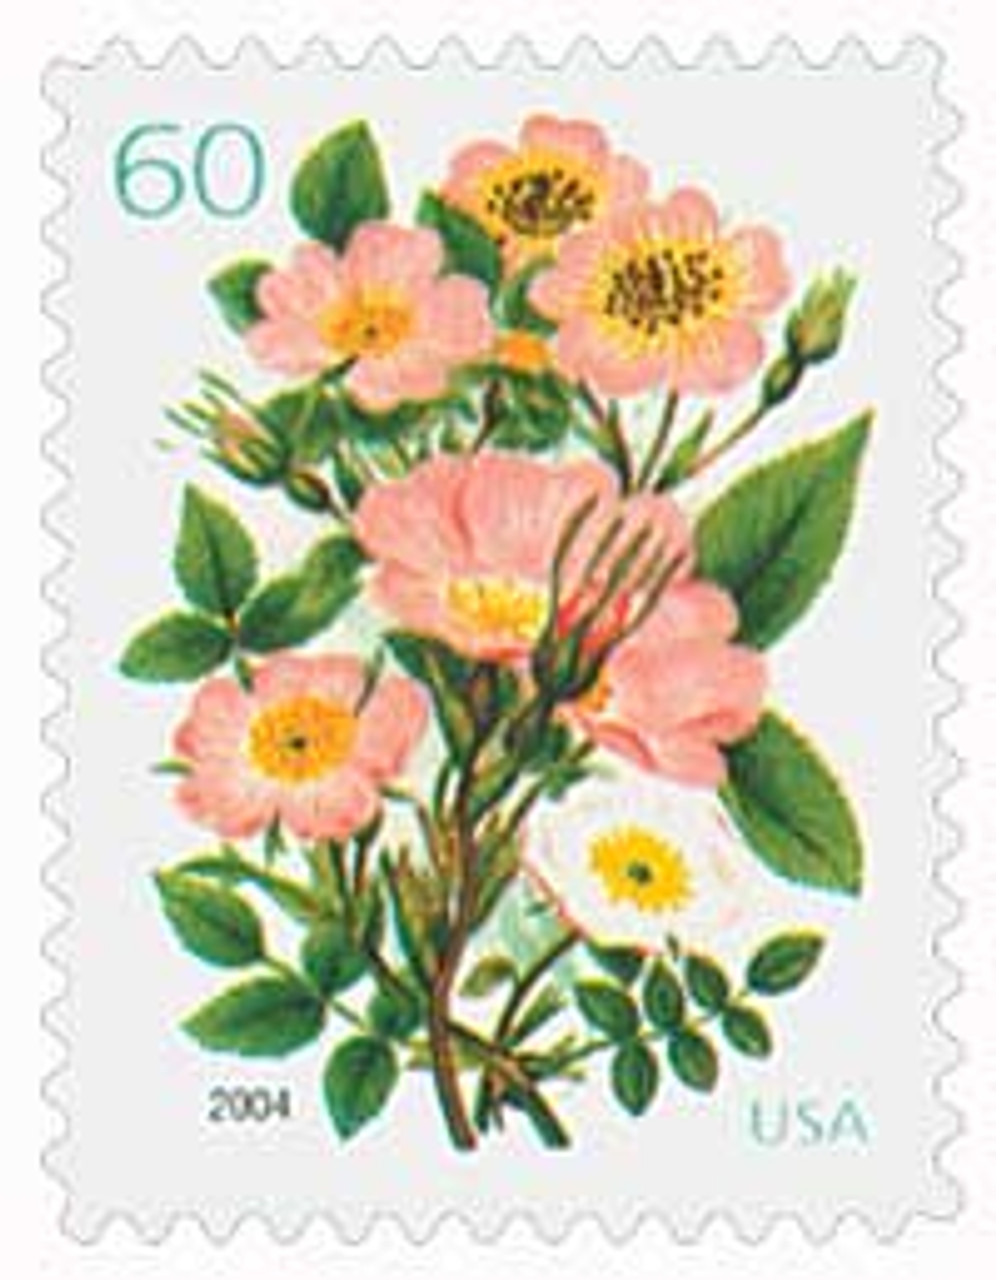 2517//27 - 1991 F-Rate Flower, set of 8 stamps - Mystic Stamp Company